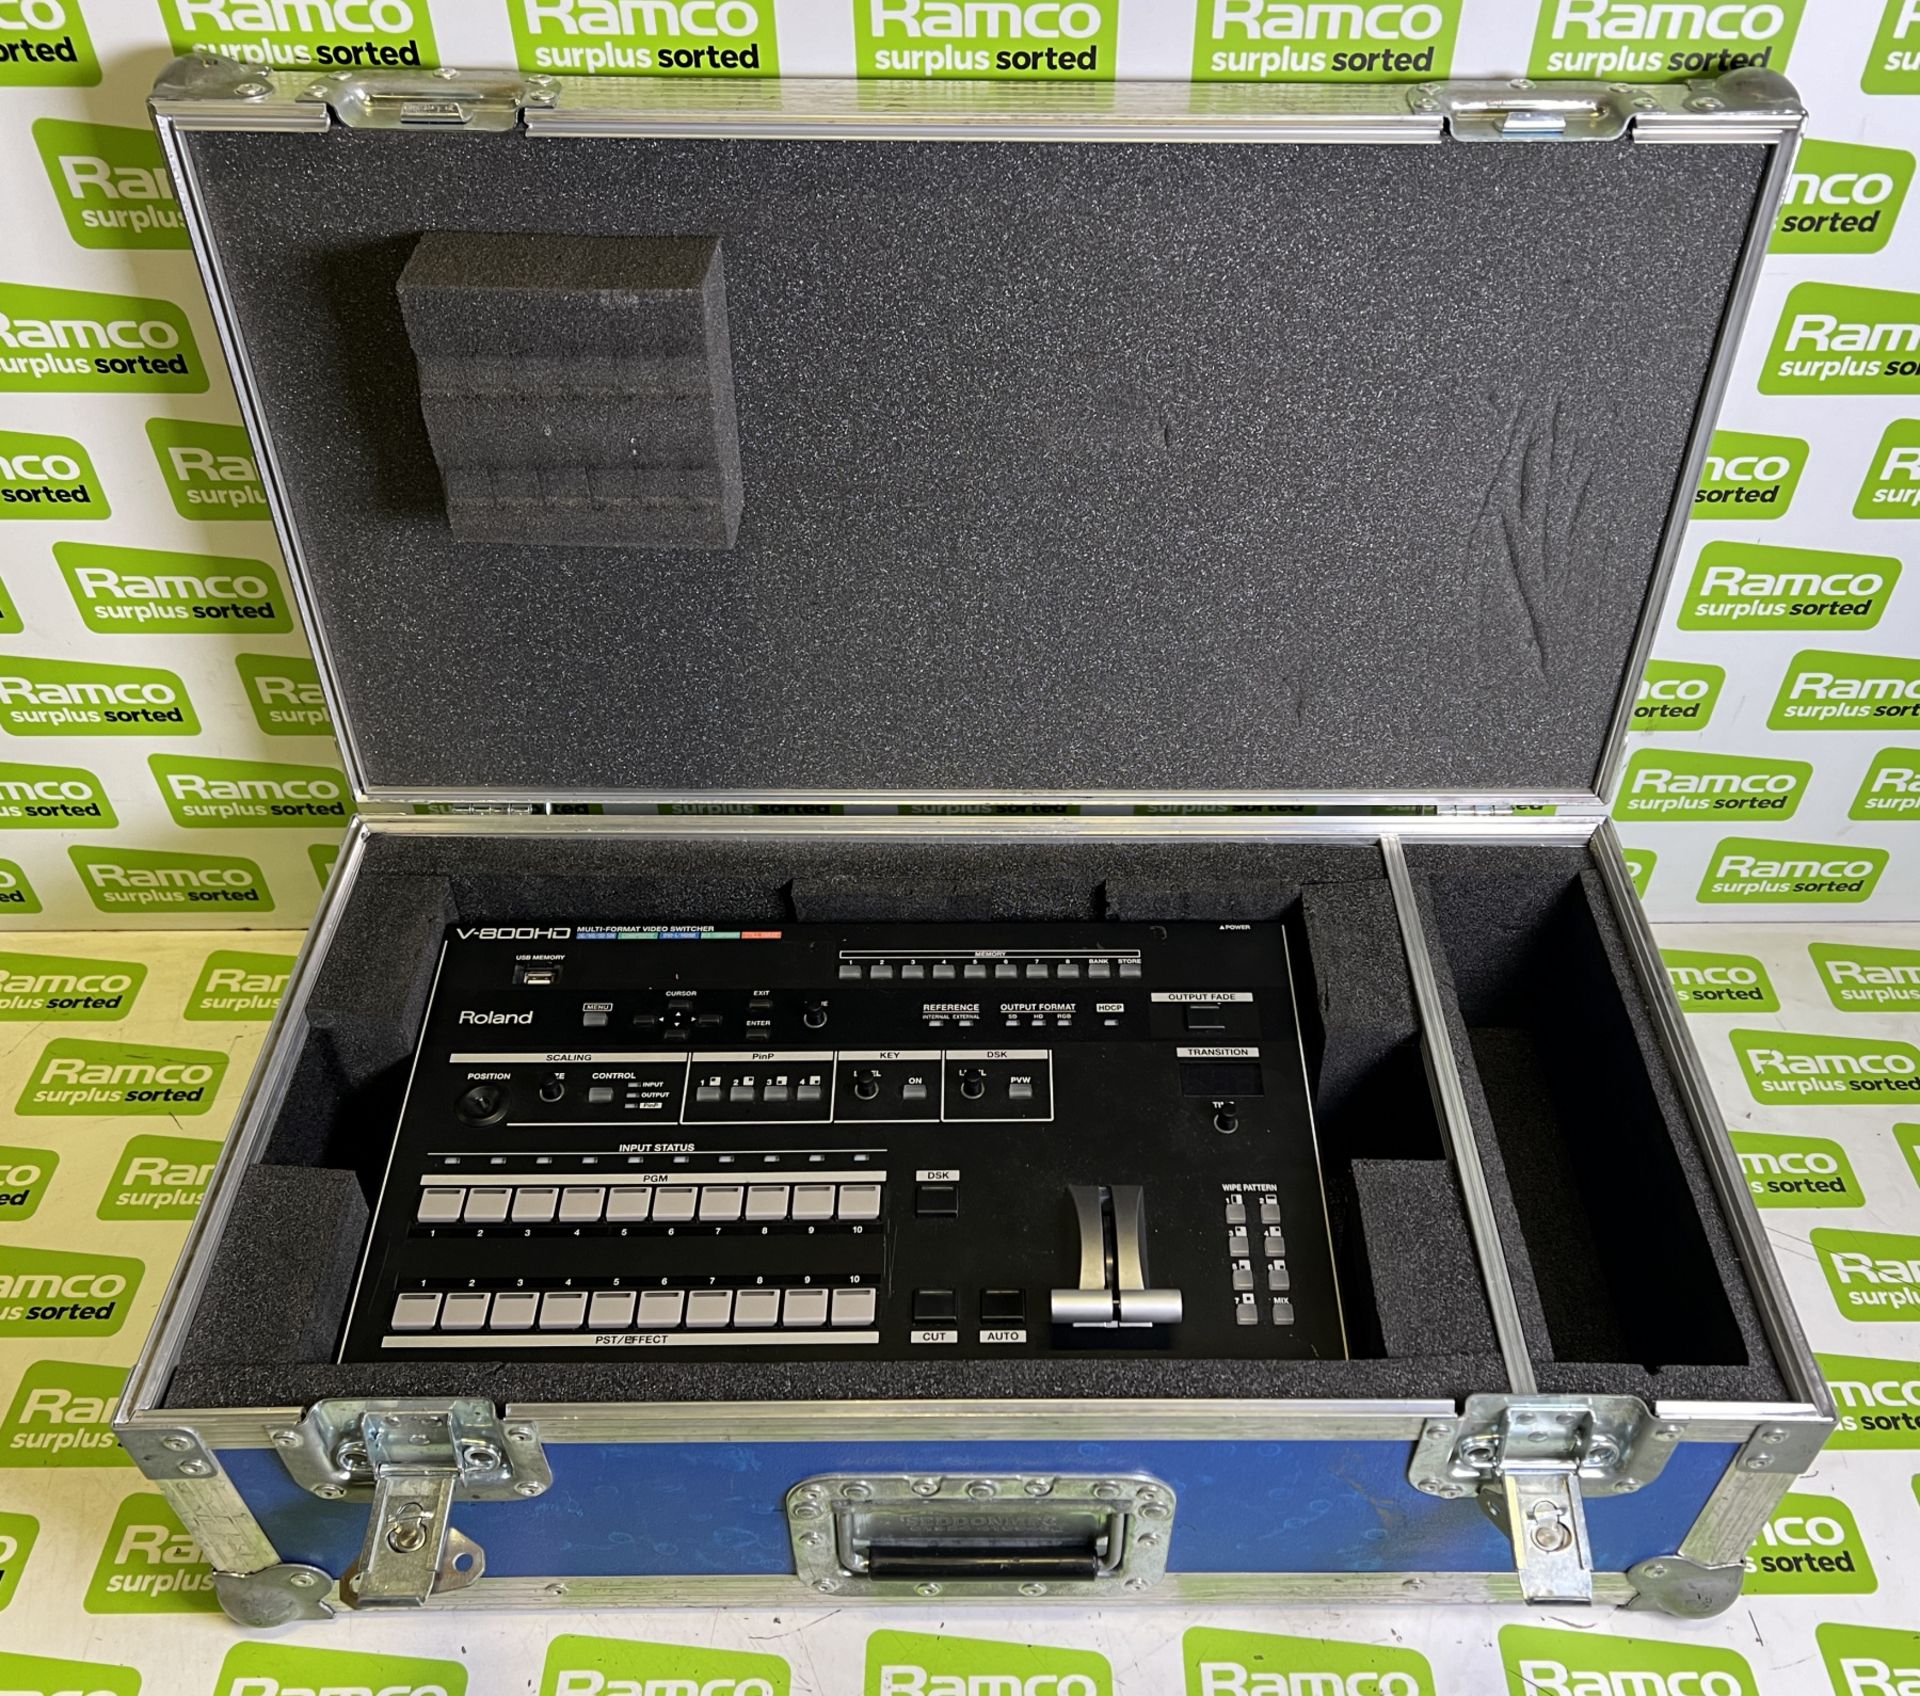 Roland V800HD vision mixer in flight case - case dimensions: L 690 x W 370 x H 230mm - FAULTY OUTPUT - Image 8 of 9